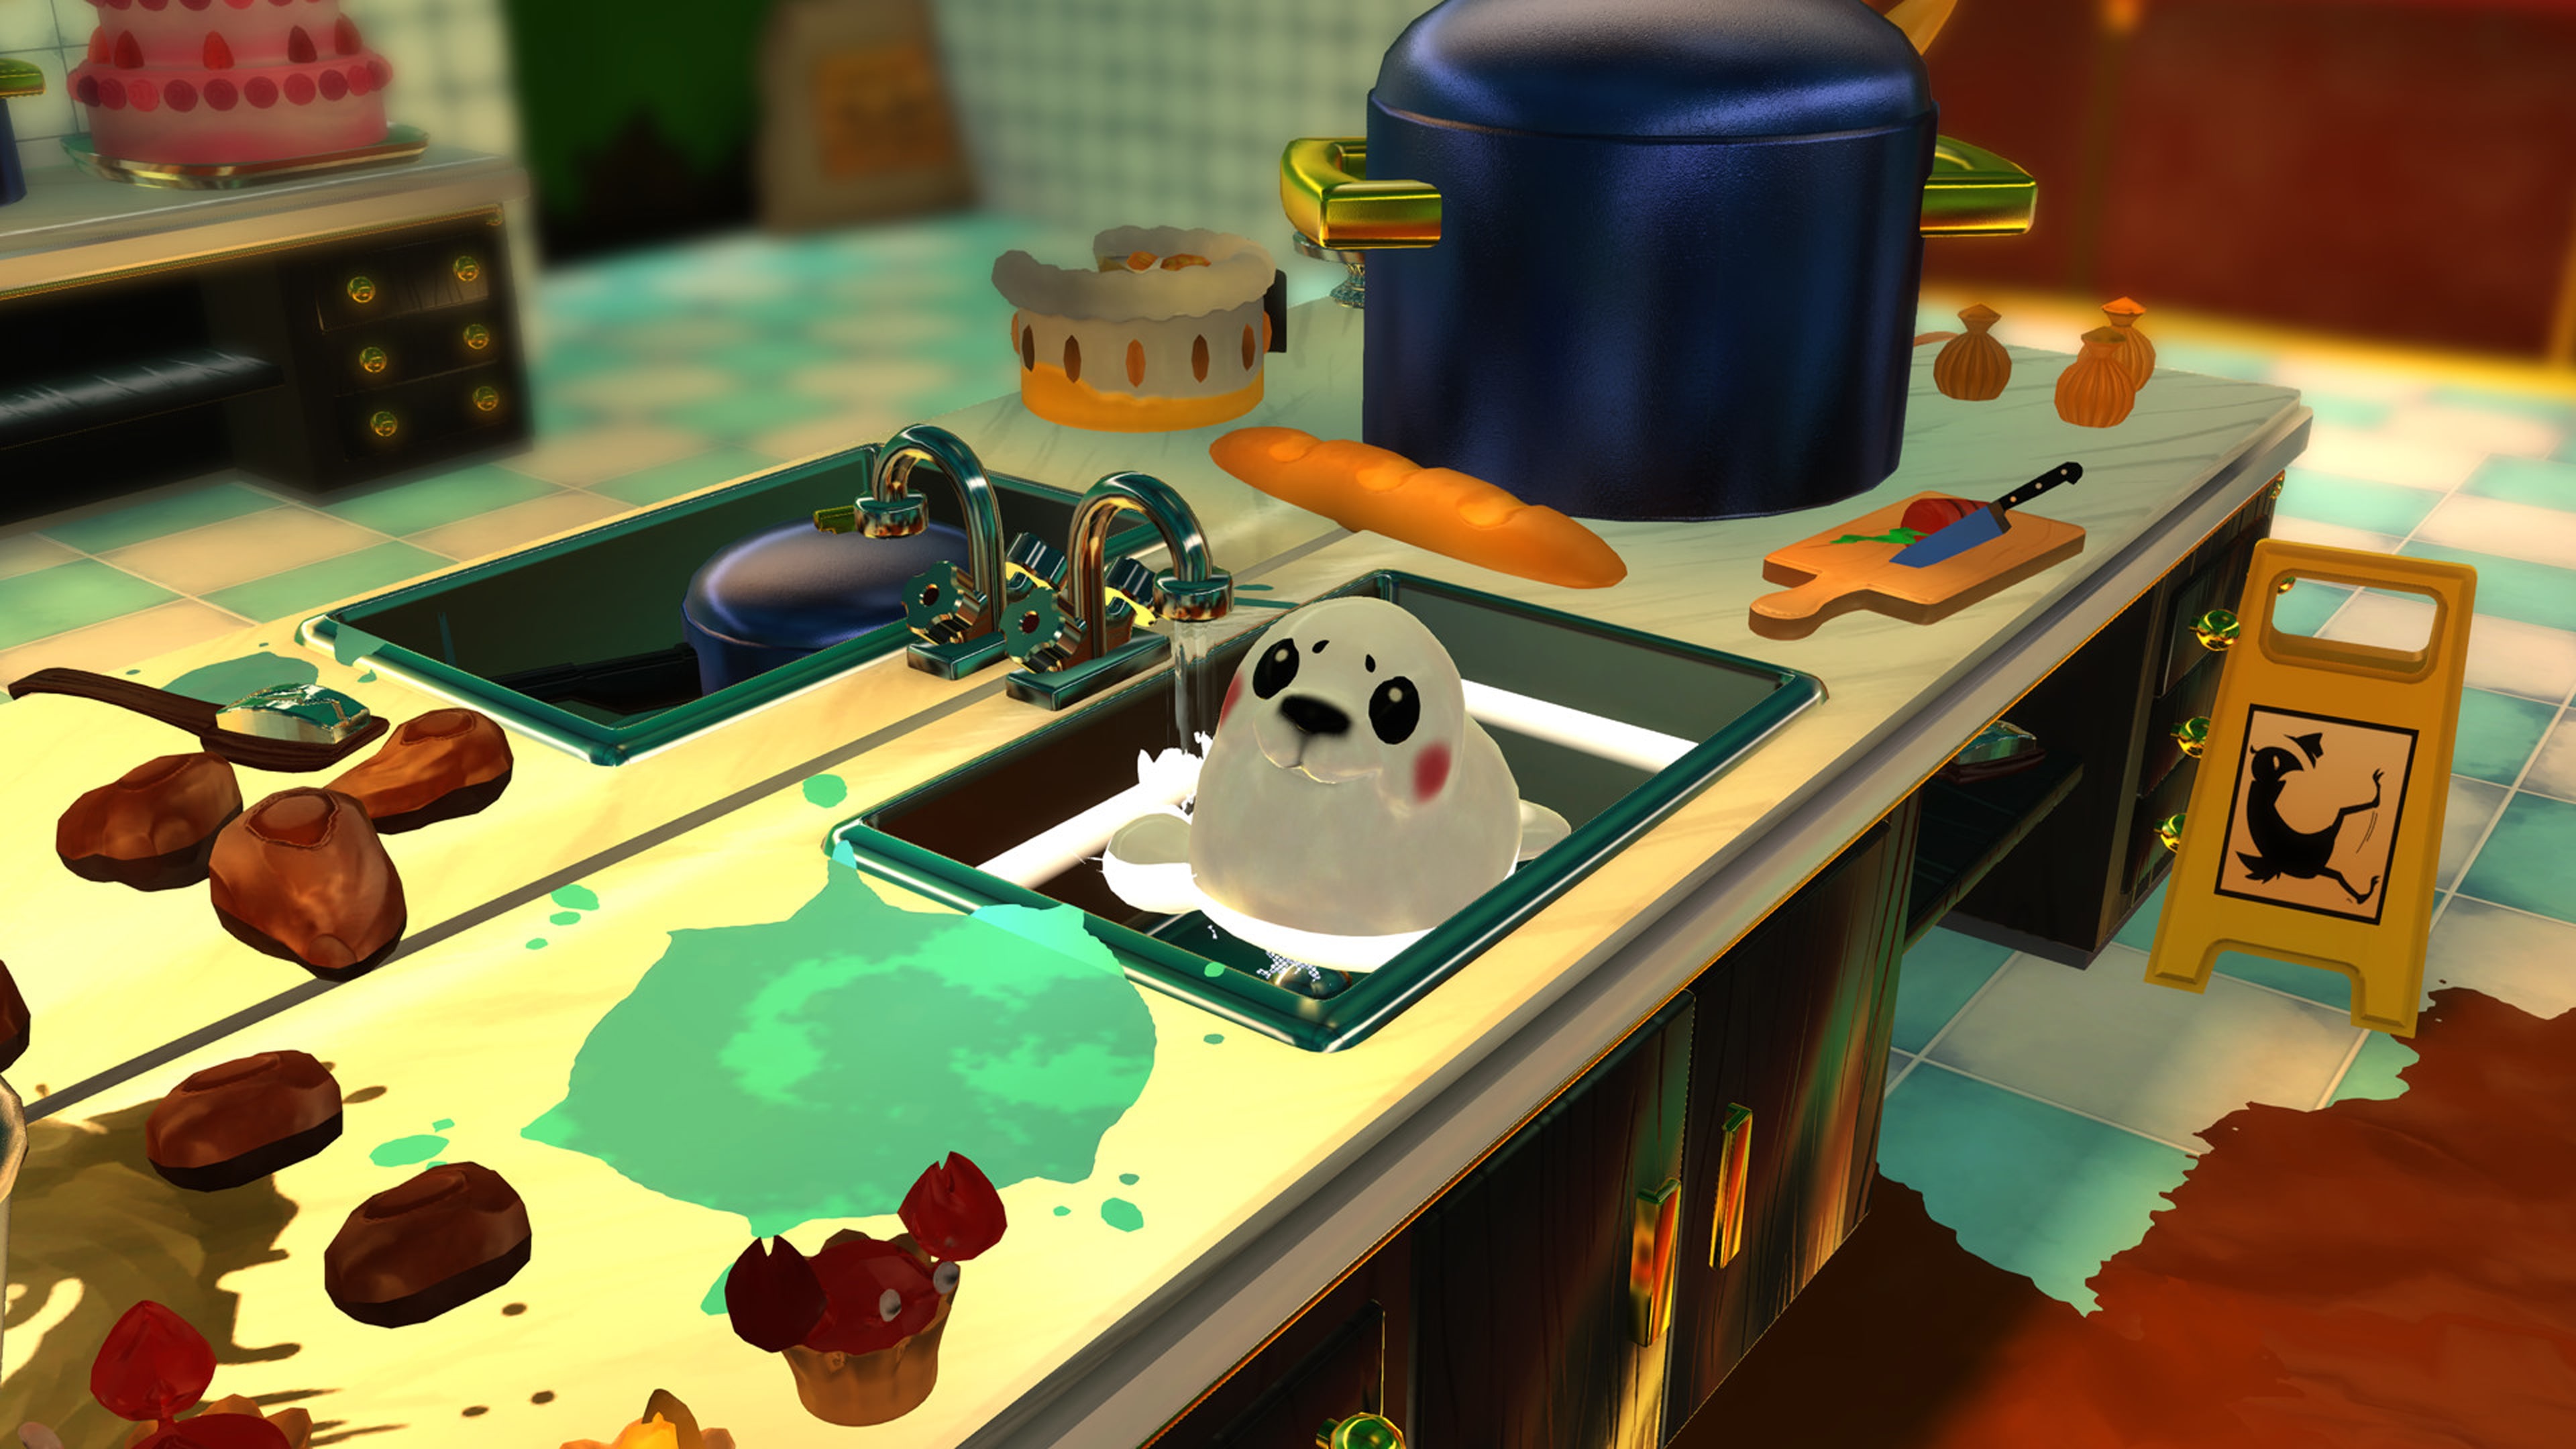 A Hat in Time: Seal the Deal Review for PlayStation 4: - GameFAQs